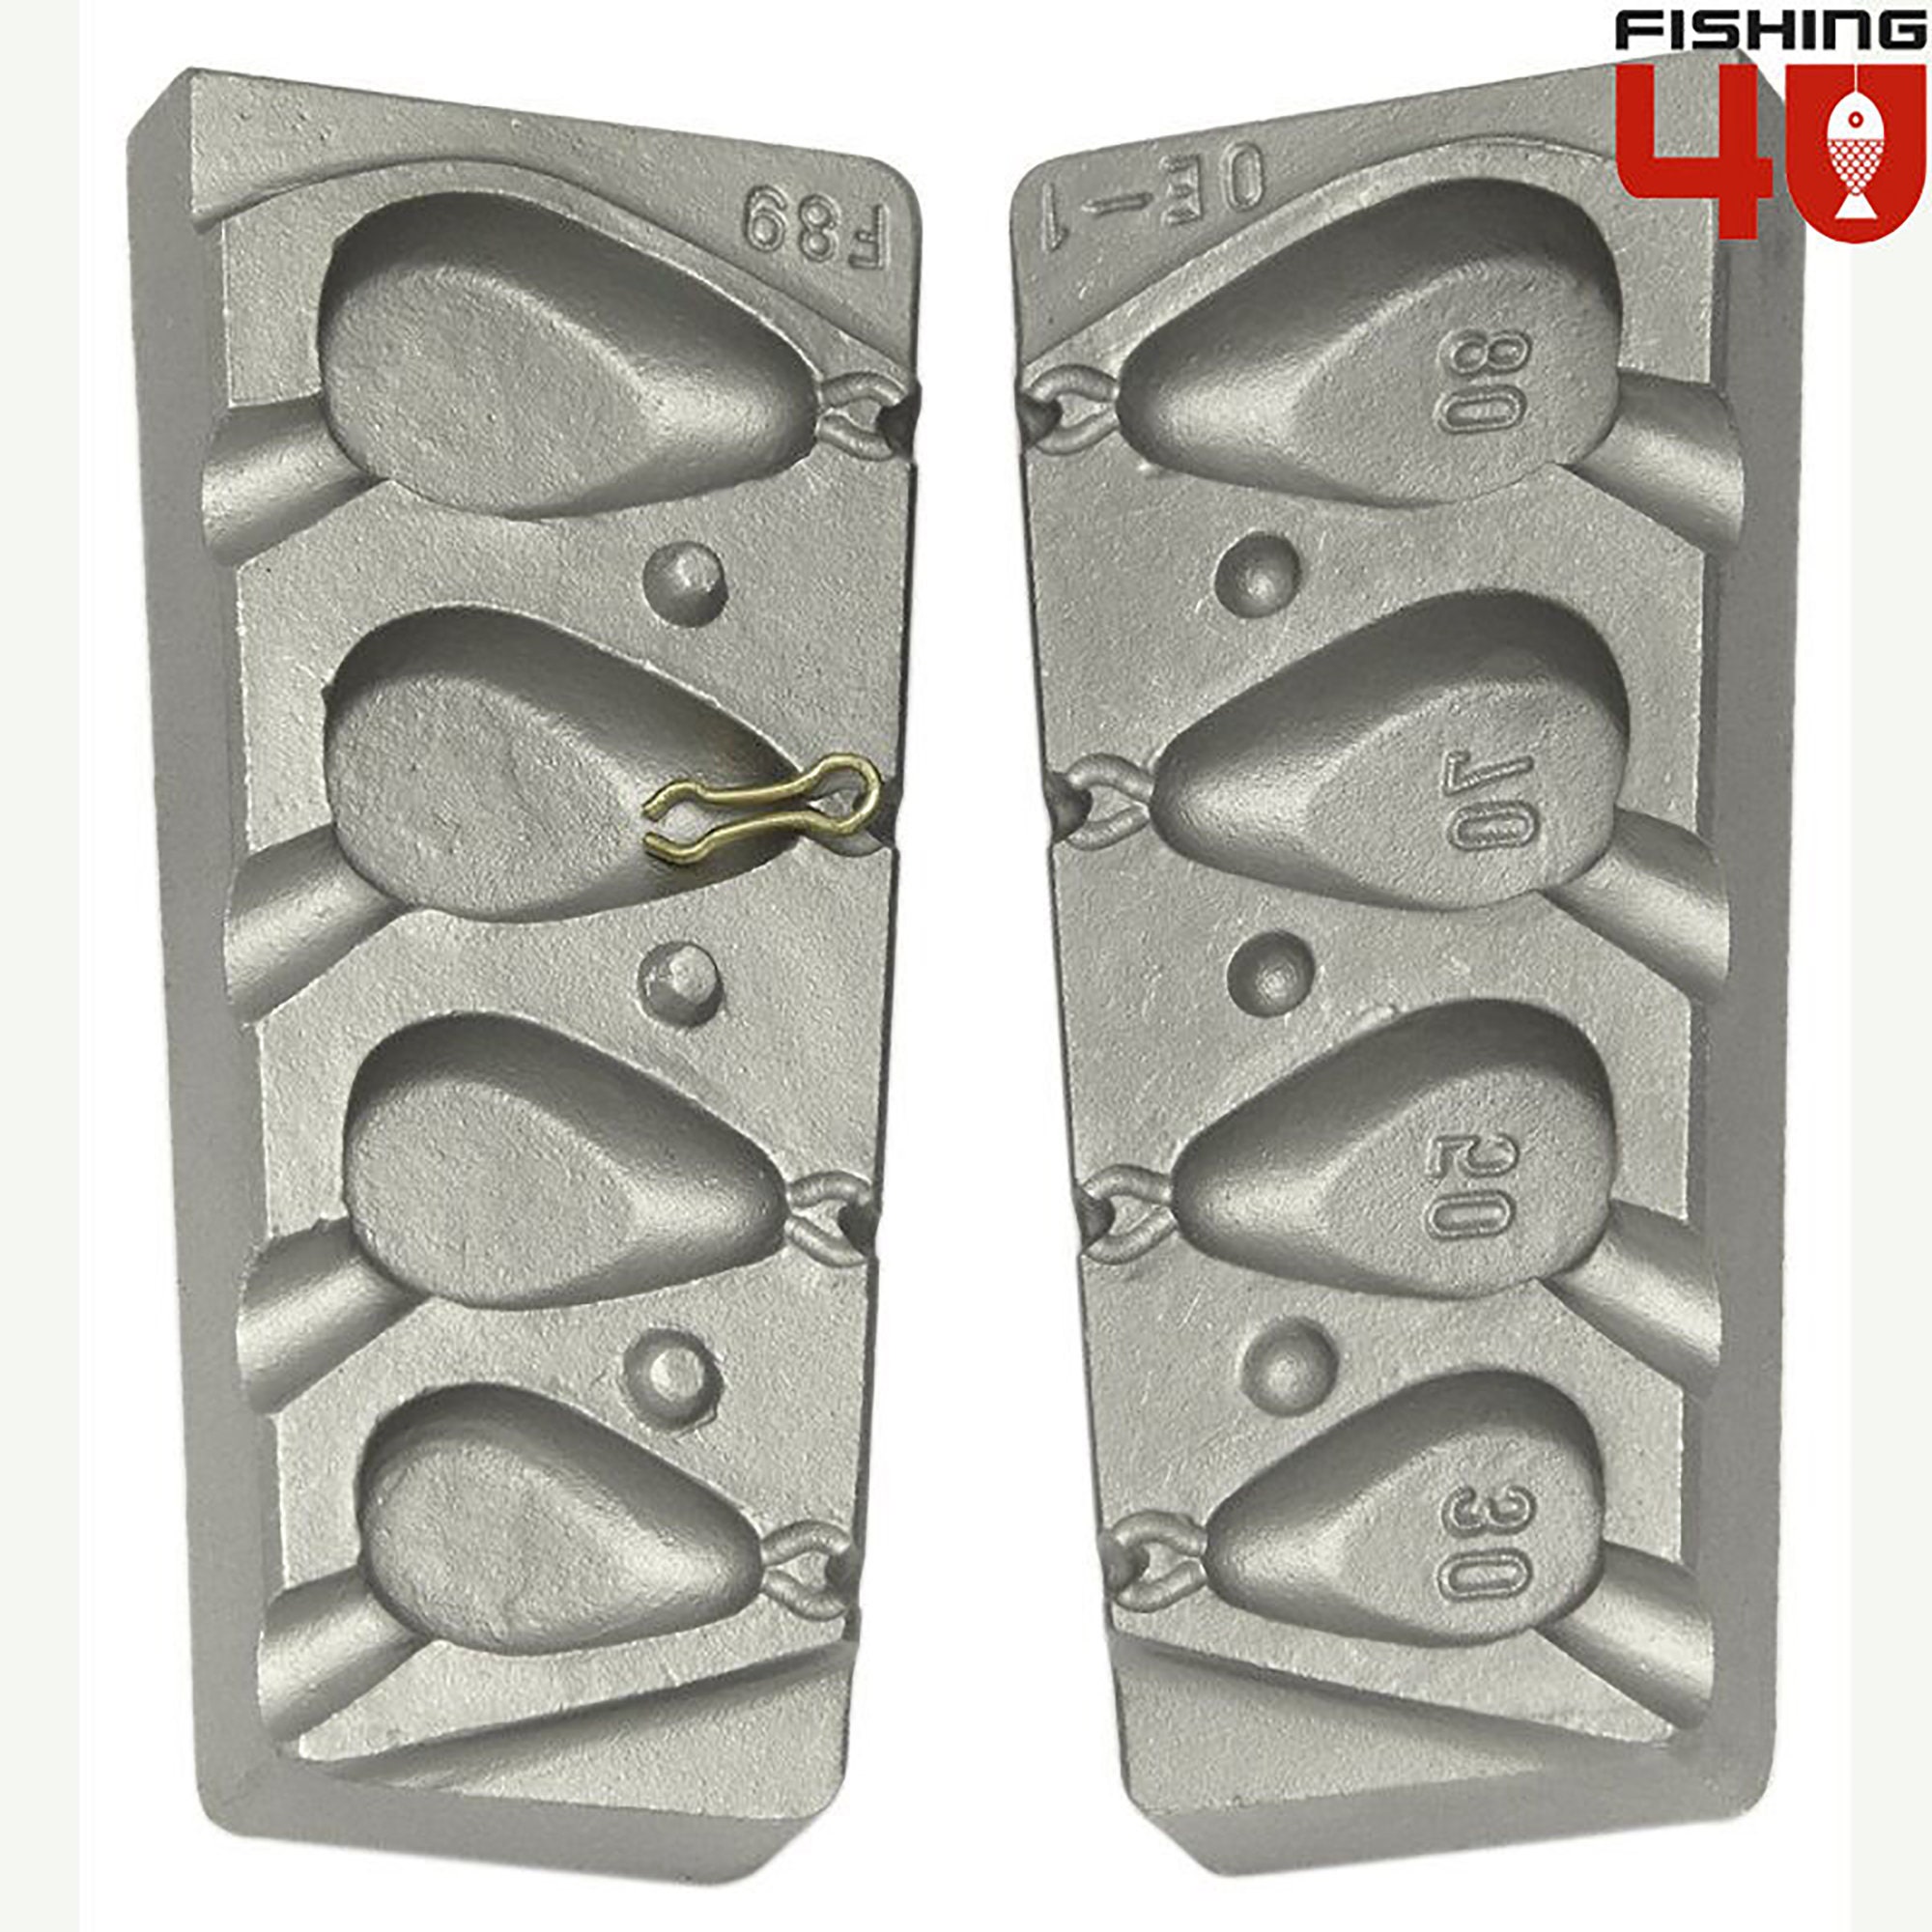 Buy Fishing Weight Molds Online In India -  India